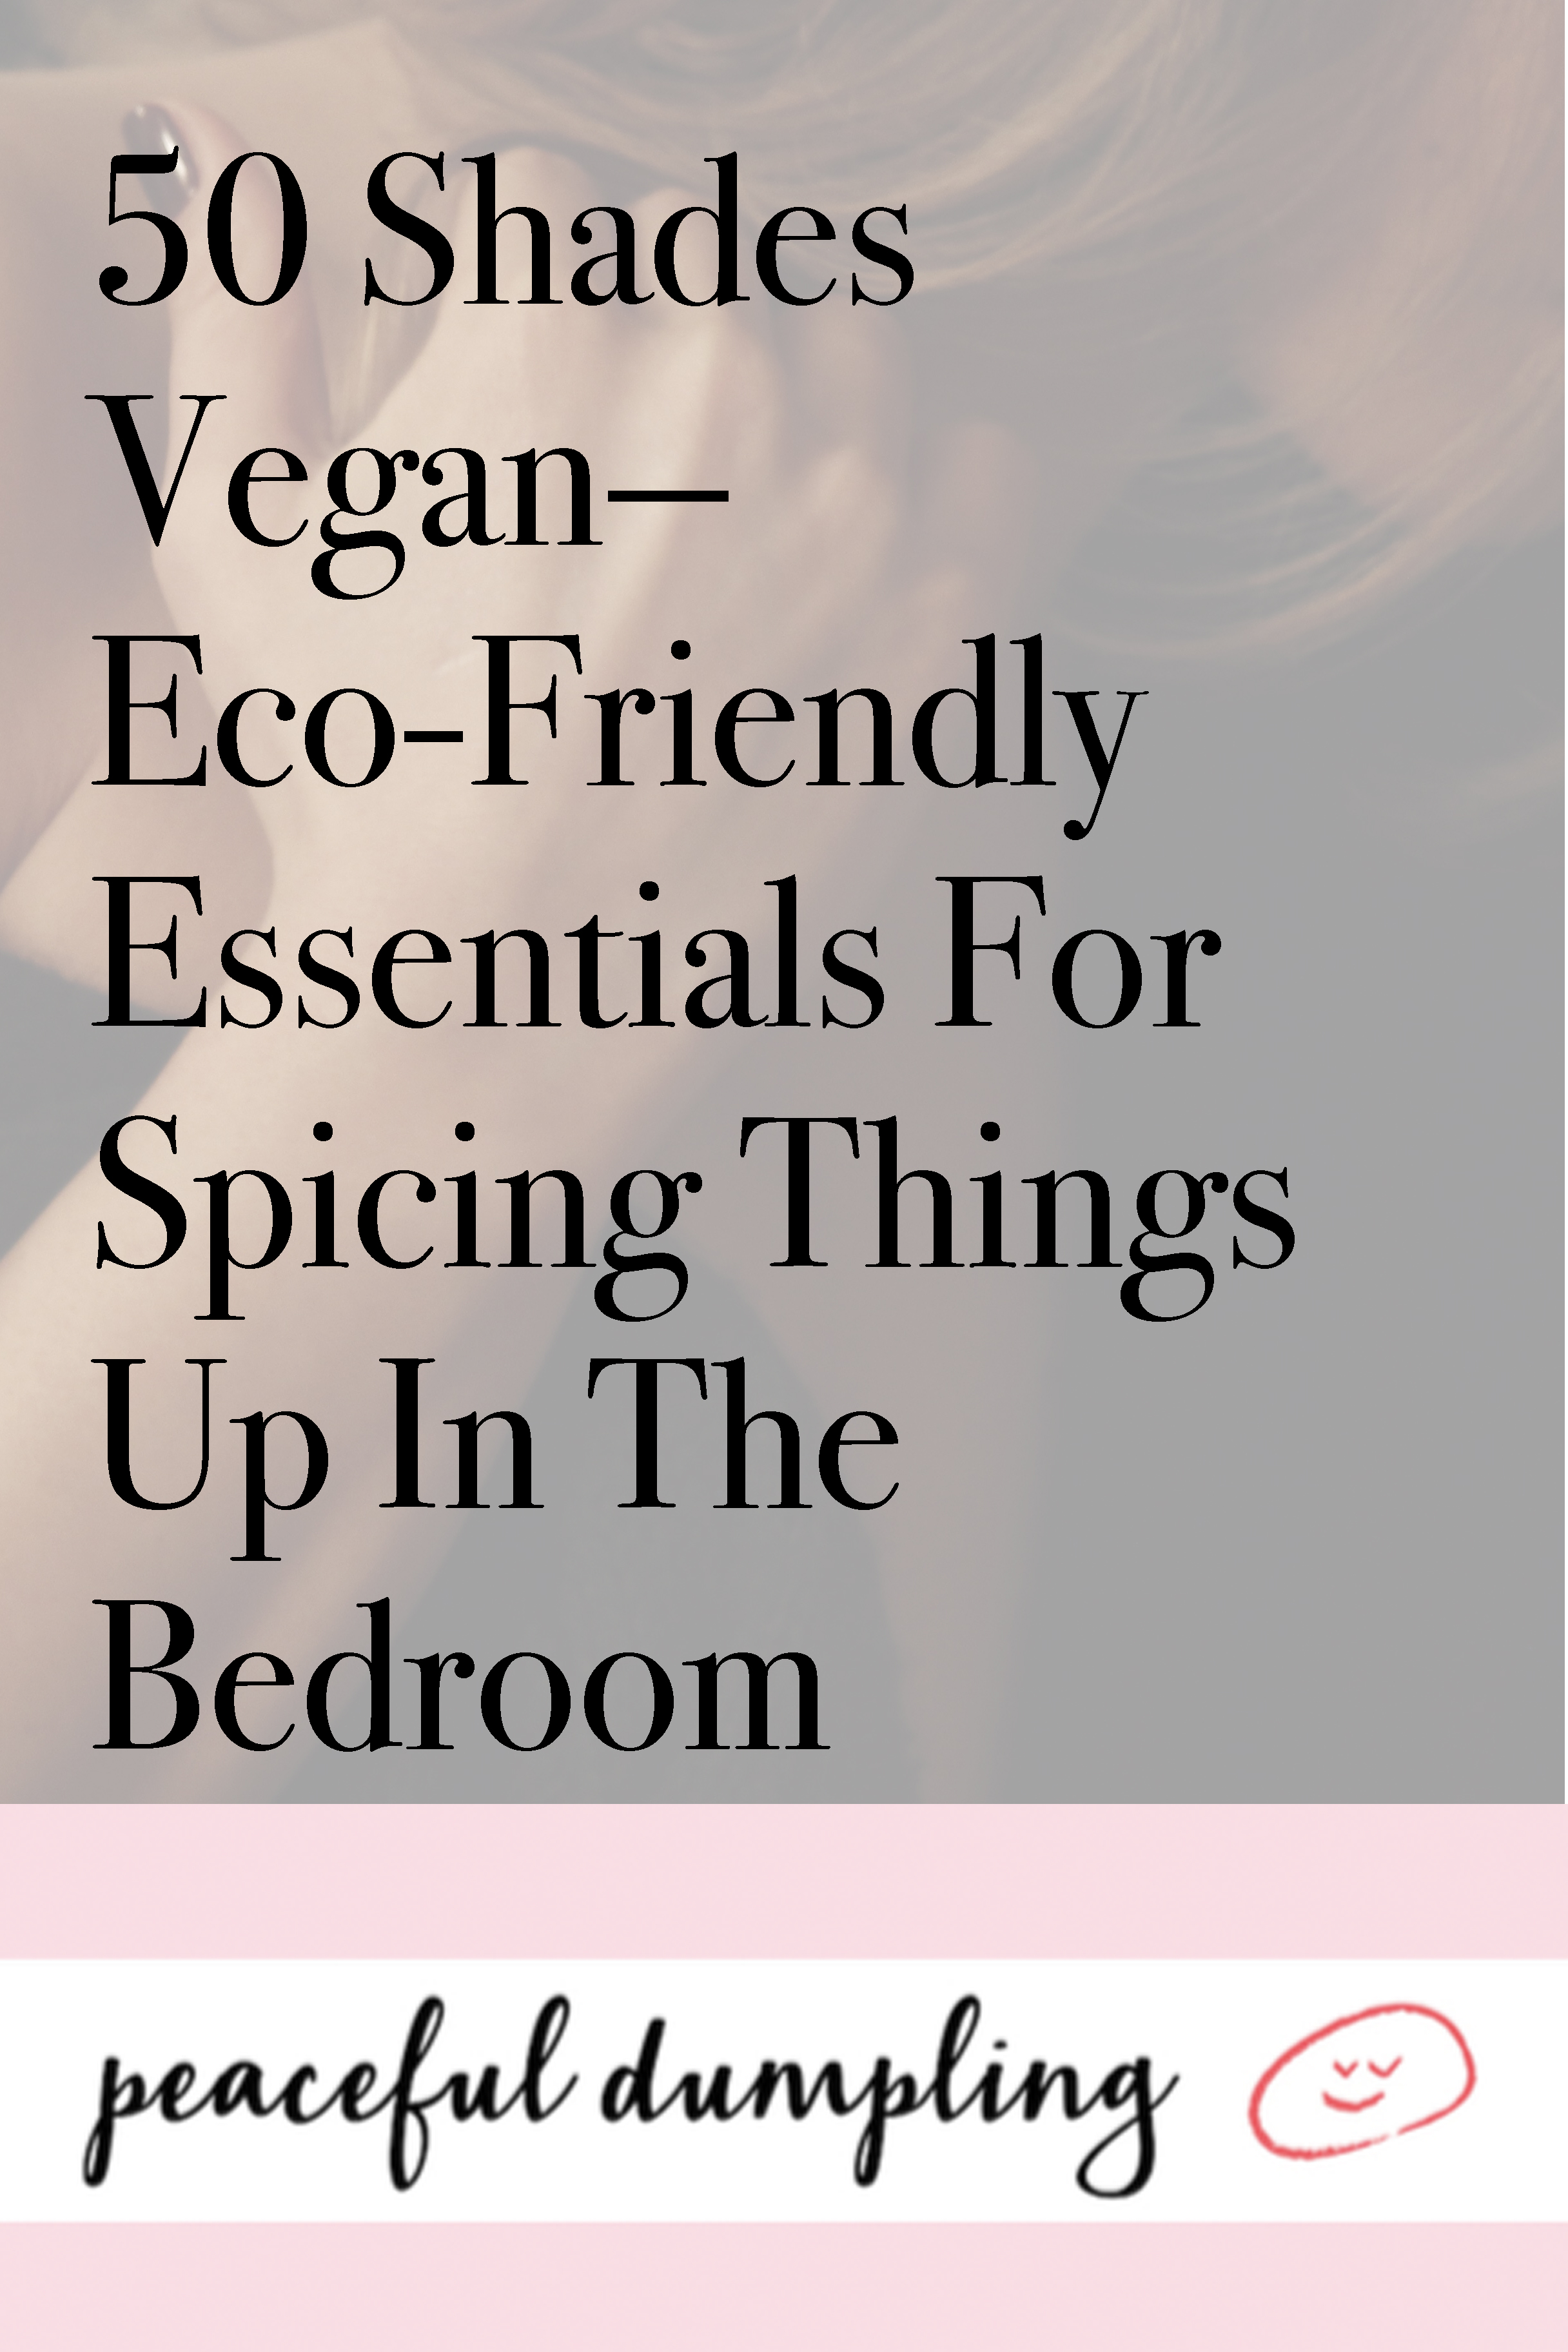 50 Shades Vegan—Eco-Friendly Essentials For Spicing Things Up In The Bedroom